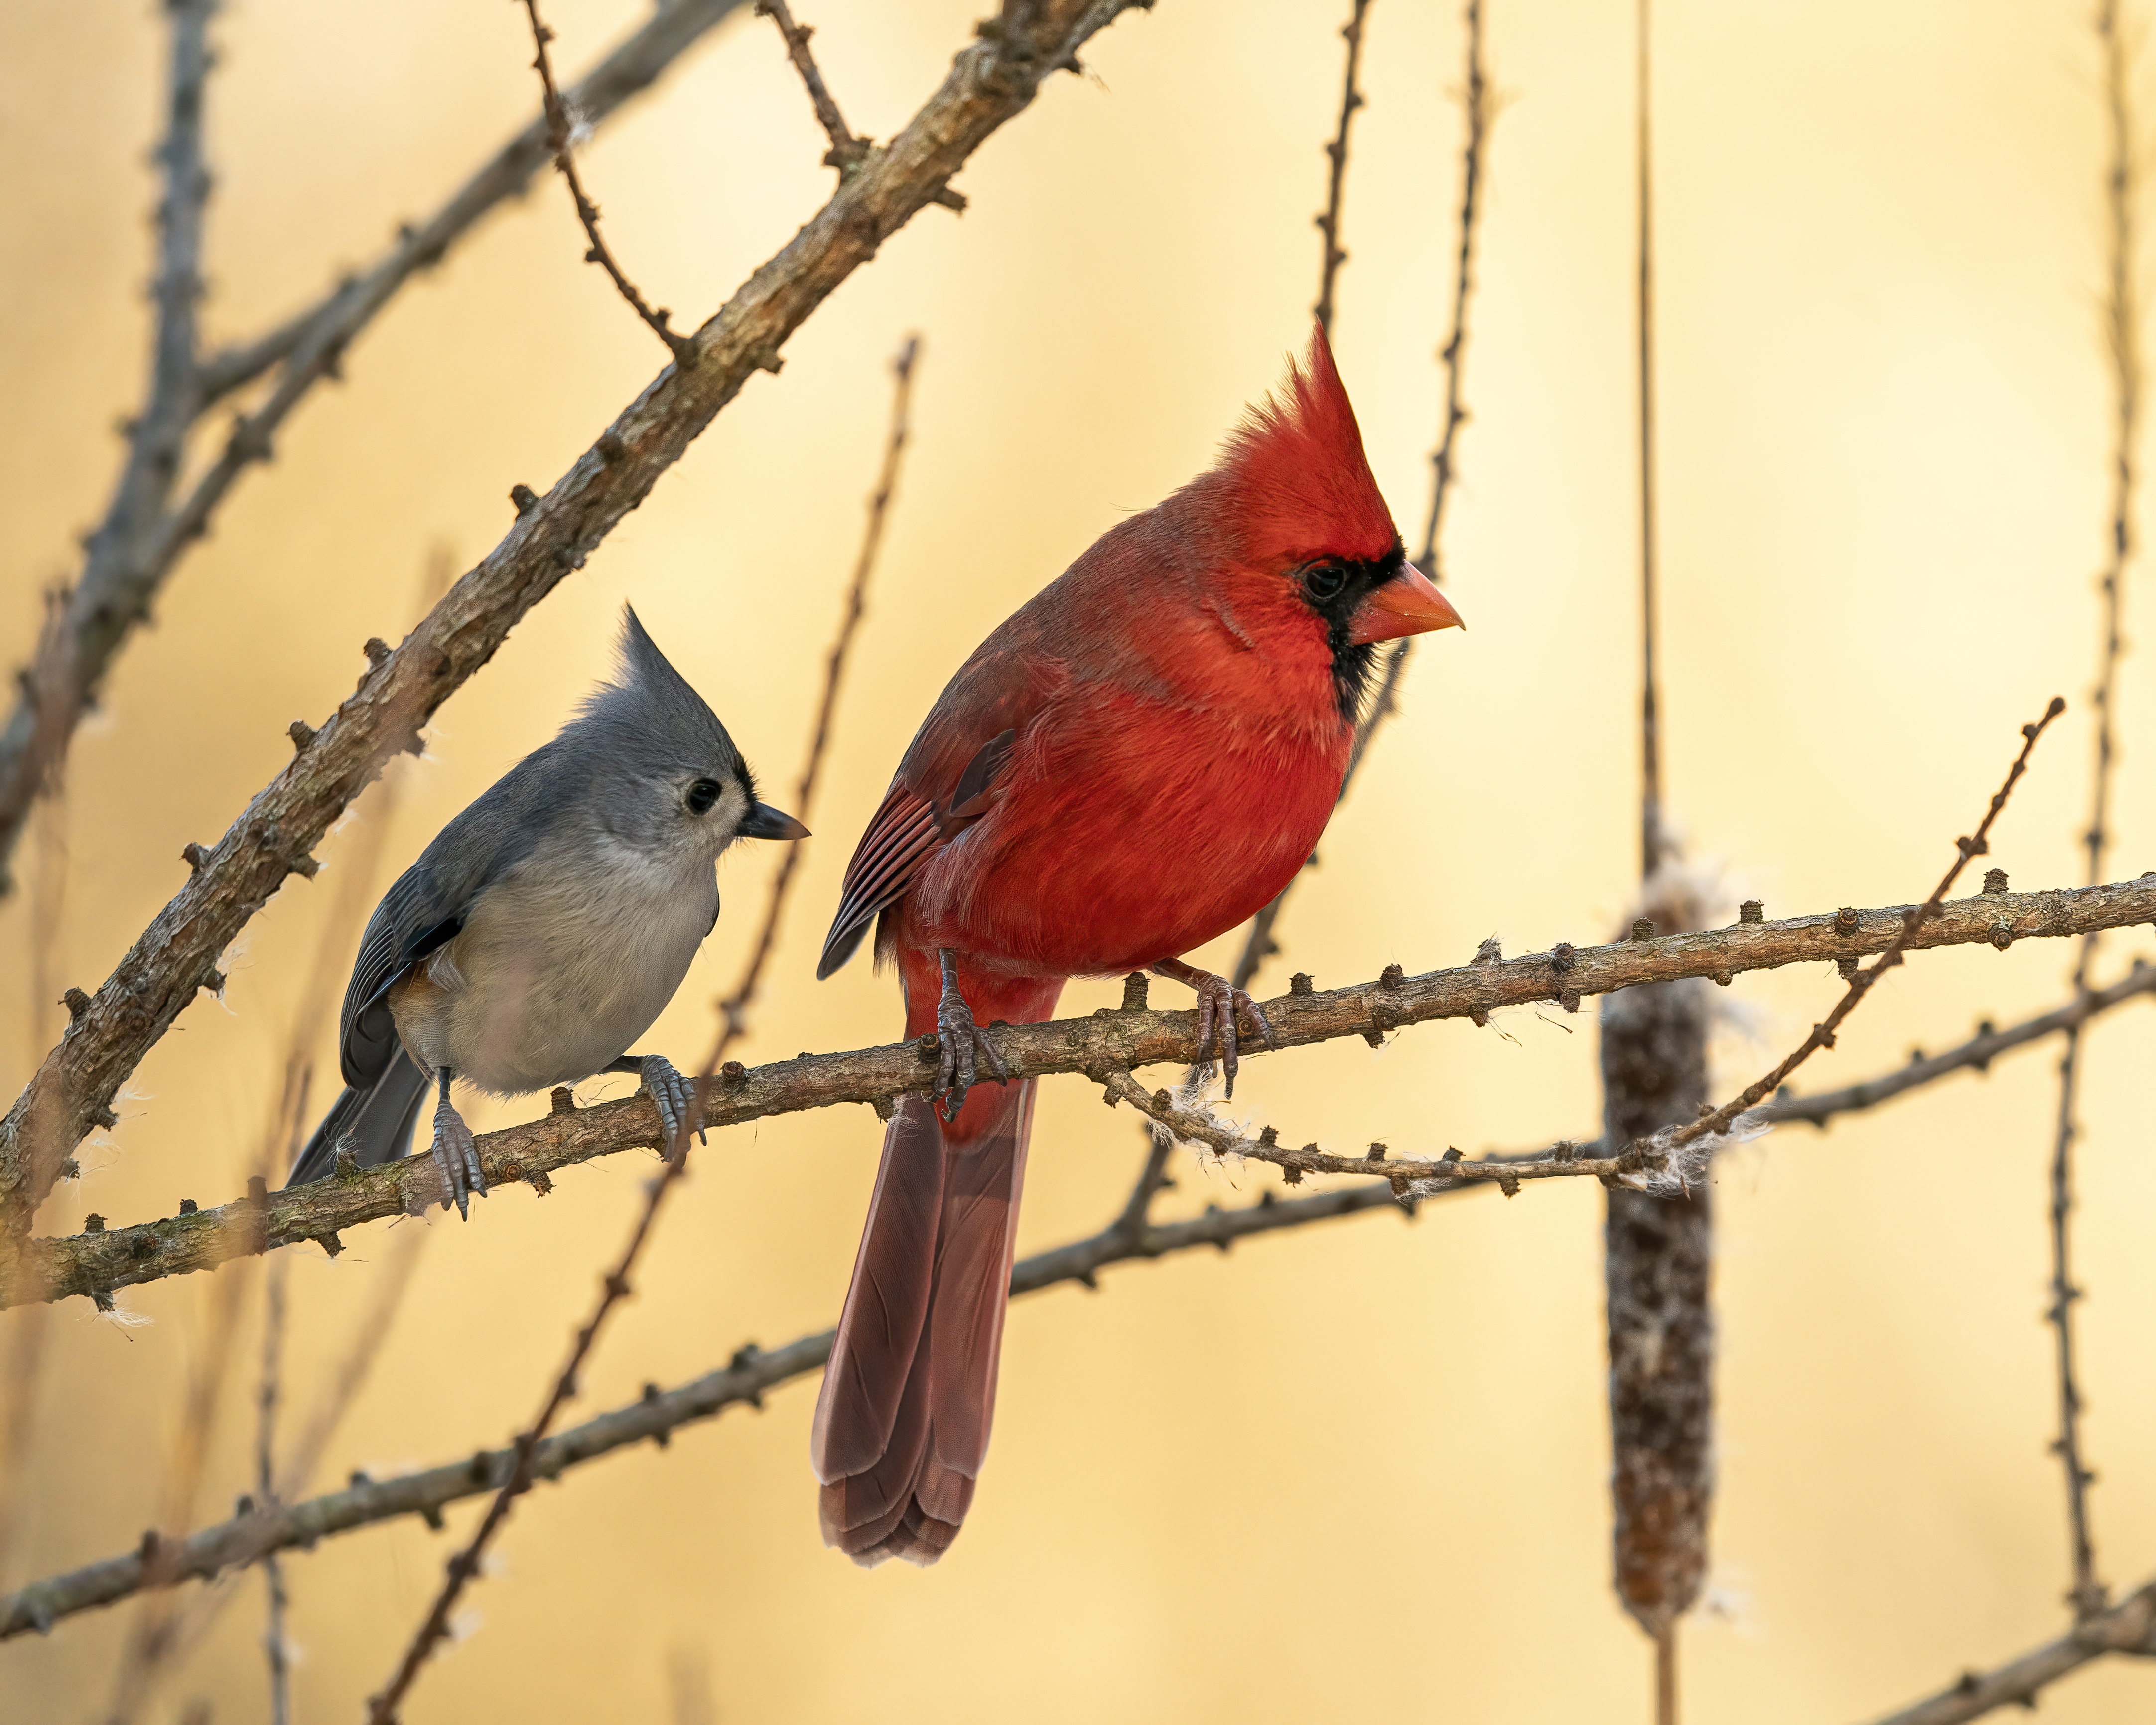 Northern Cardinal and Tufted Titmouse, Milford, Michigan.